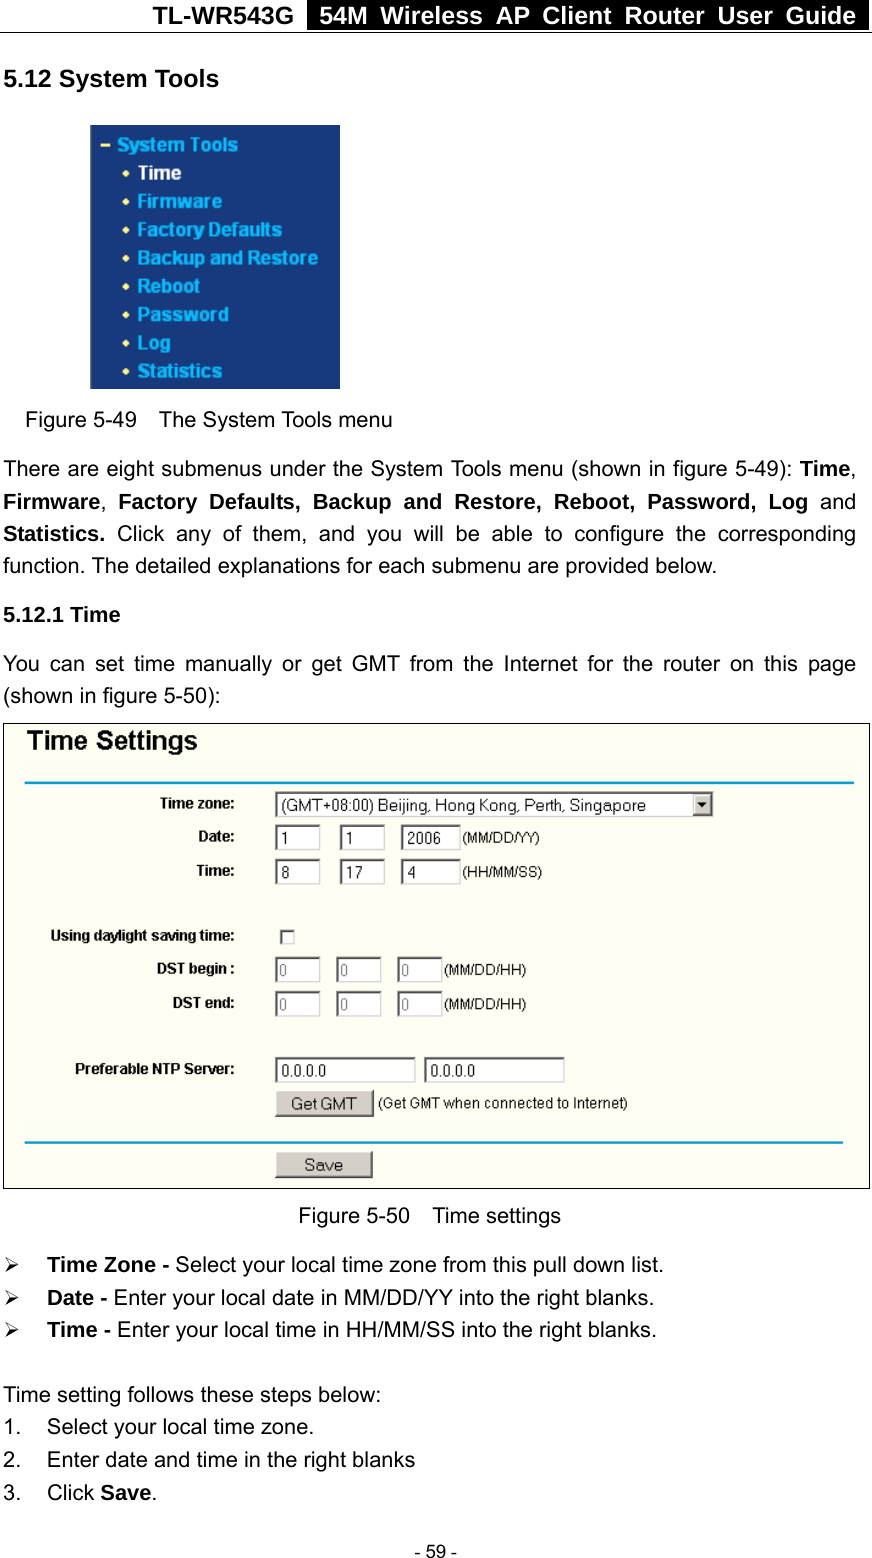 TL-WR543G   54M Wireless AP Client Router User Guide  5.12 System Tools  Figure 5-49  The System Tools menu There are eight submenus under the System Tools menu (shown in figure 5-49): Time, Firmware,  Factory Defaults, Backup and Restore, Reboot, Password, Log and Statistics.  Click any of them, and you will be able to configure the corresponding function. The detailed explanations for each submenu are provided below. 5.12.1 Time You can set time manually or get GMT from the Internet for the router on this page (shown in figure 5-50):  Figure 5-50  Time settings ¾ Time Zone - Select your local time zone from this pull down list. ¾ Date - Enter your local date in MM/DD/YY into the right blanks. ¾ Time - Enter your local time in HH/MM/SS into the right blanks.  Time setting follows these steps below: 1.  Select your local time zone. 2.  Enter date and time in the right blanks 3. Click Save.  - 59 - 